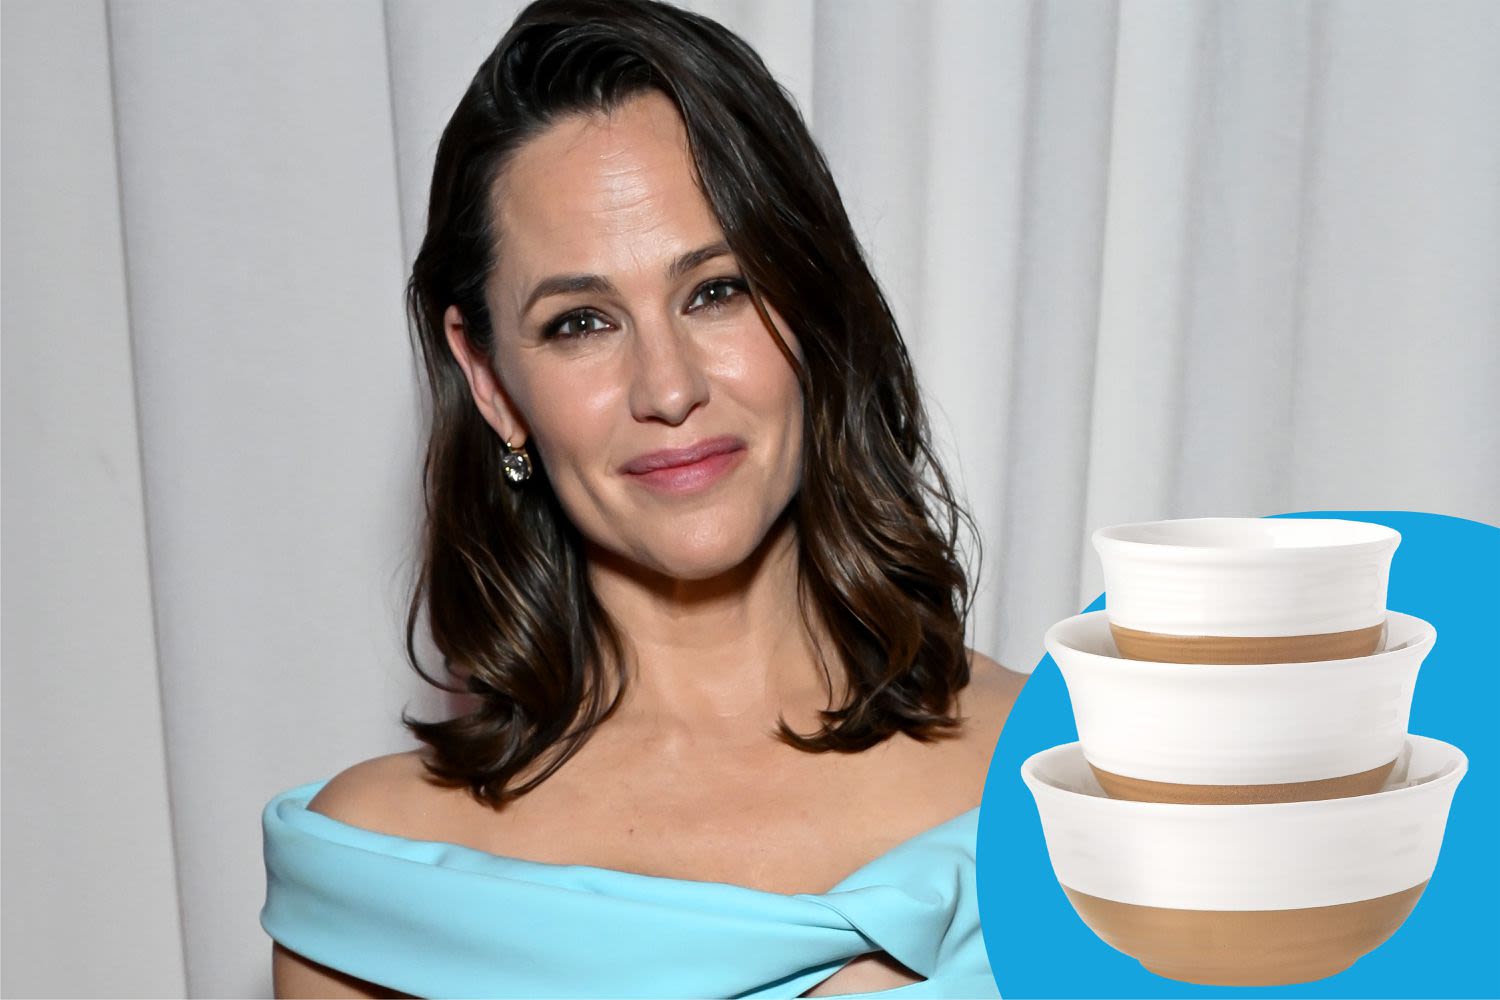 Jennifer Garner’s Mixing Bowl Looks So Much Like This ‘Very Beautiful and Classy’ One That’s on Sale at Amazon